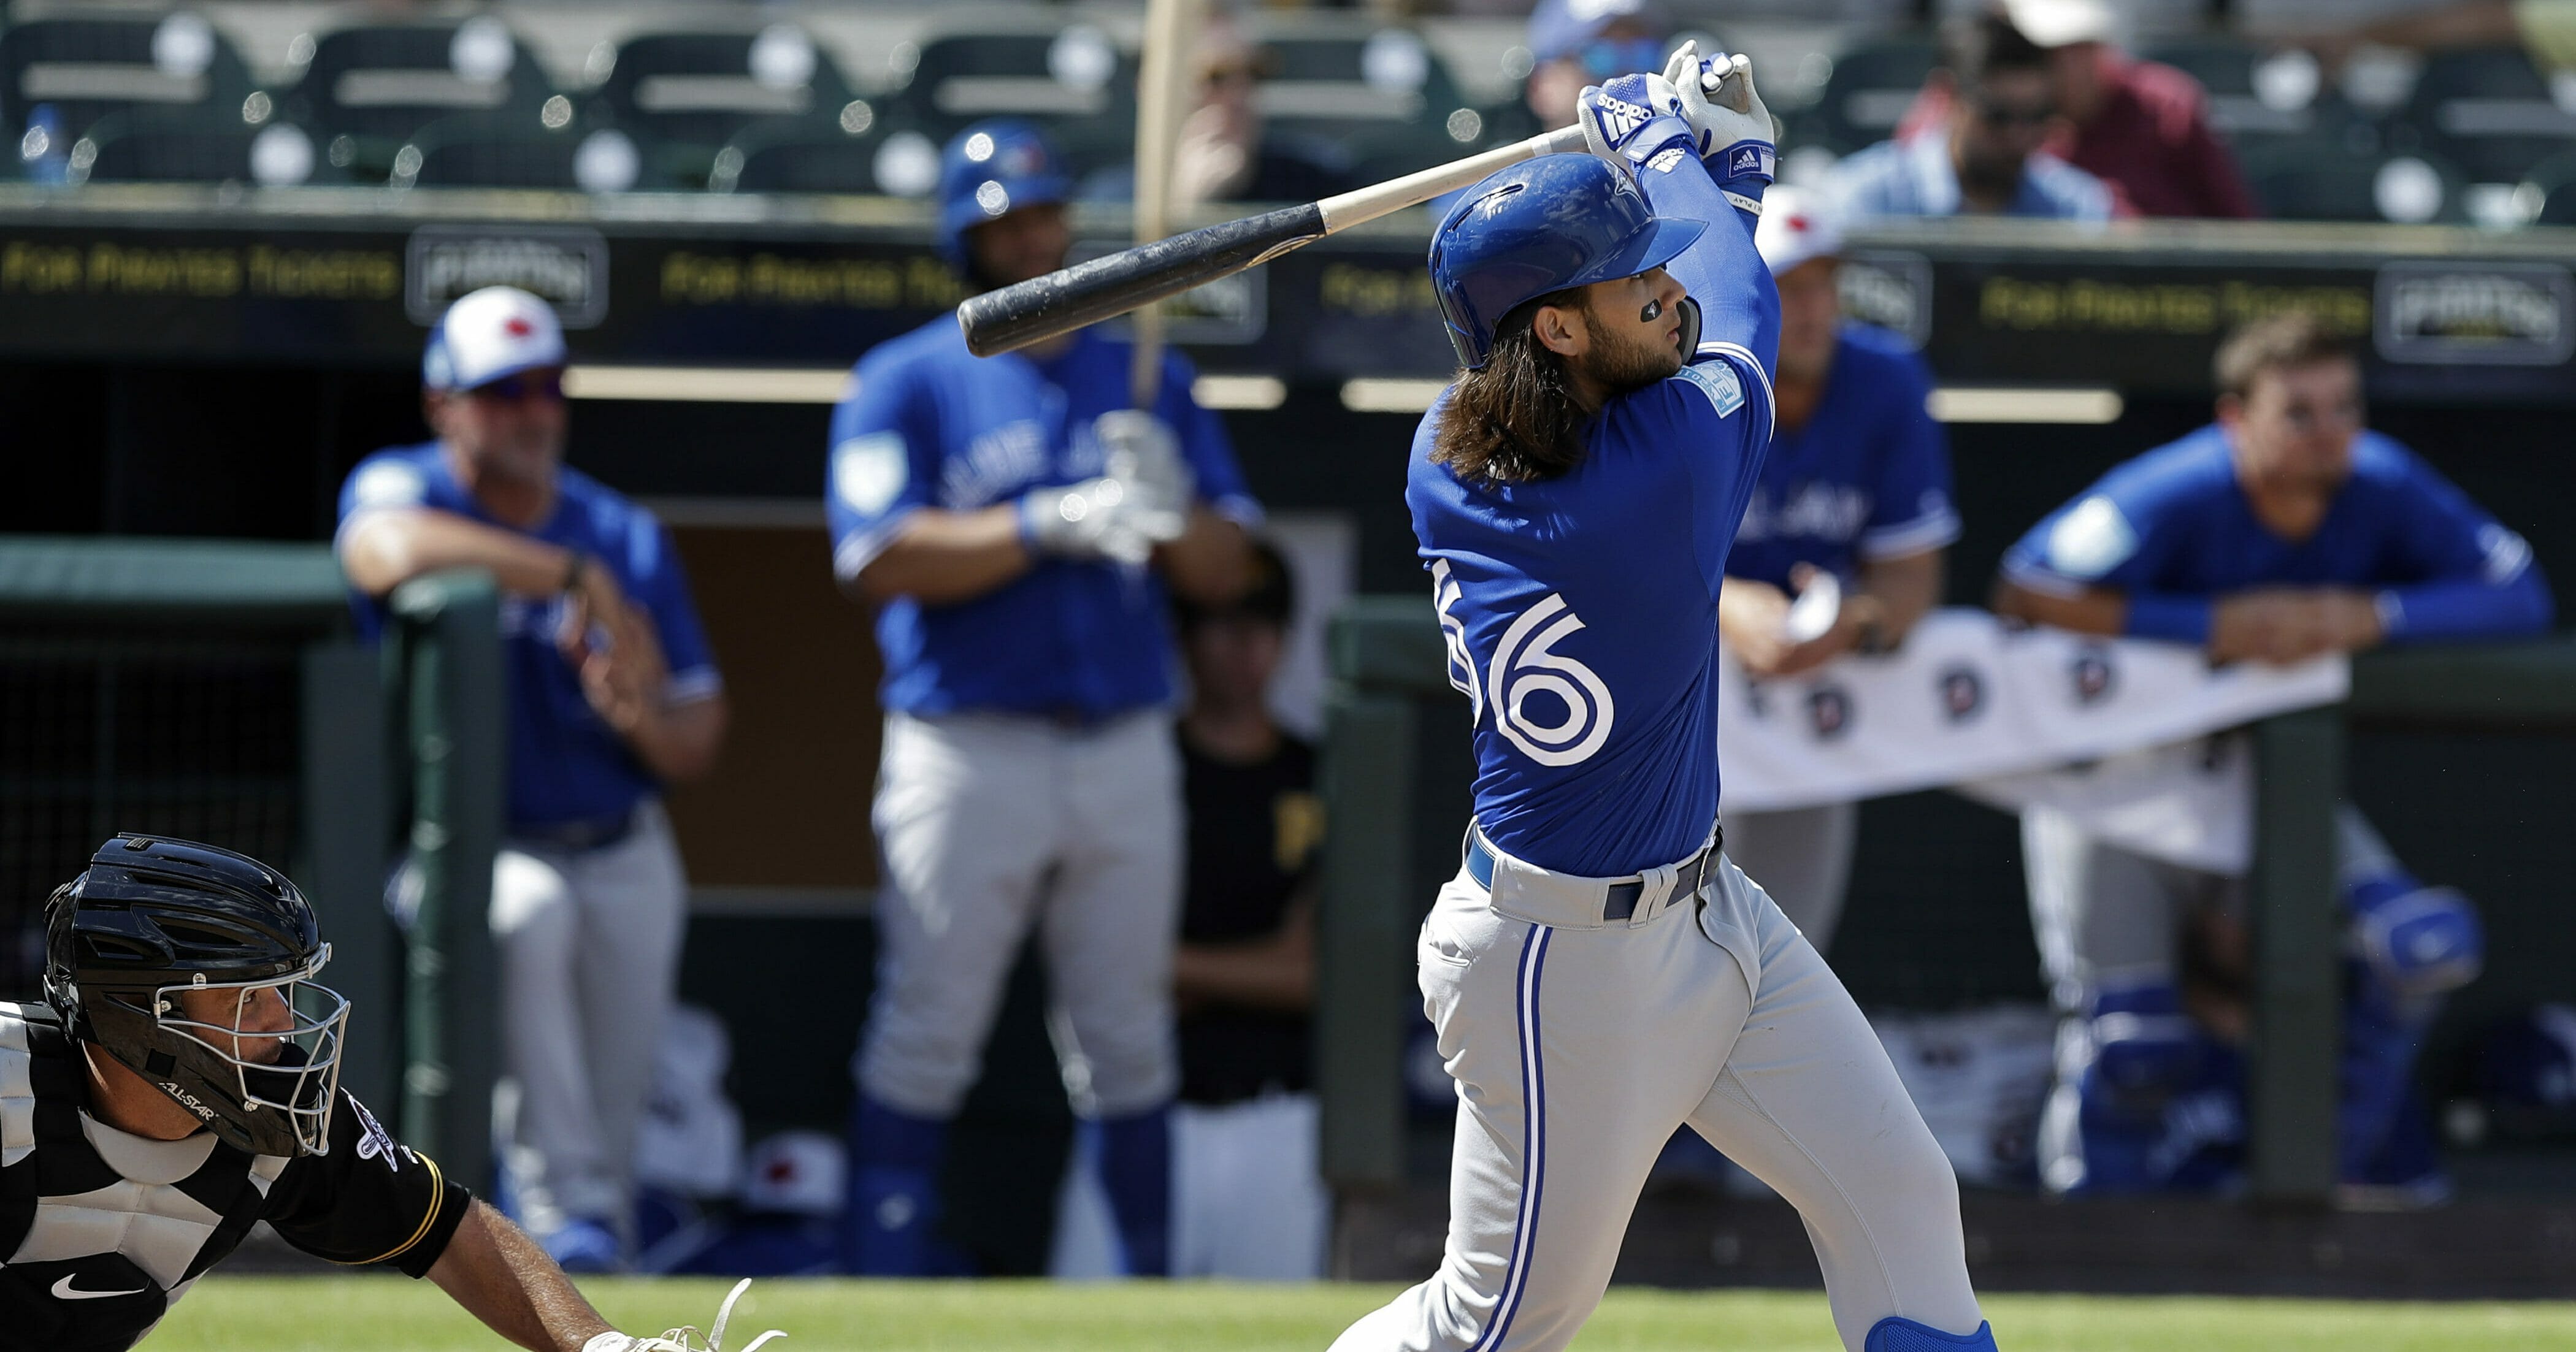 Toronto Blue Jays' Bo Bichette watches his two-run home run off Pittsburgh Pirates relief pitcher Matt Eckelman during the fourth inning of a spring training baseball game Friday, March 8, 2019, in Bradenton, Fla.